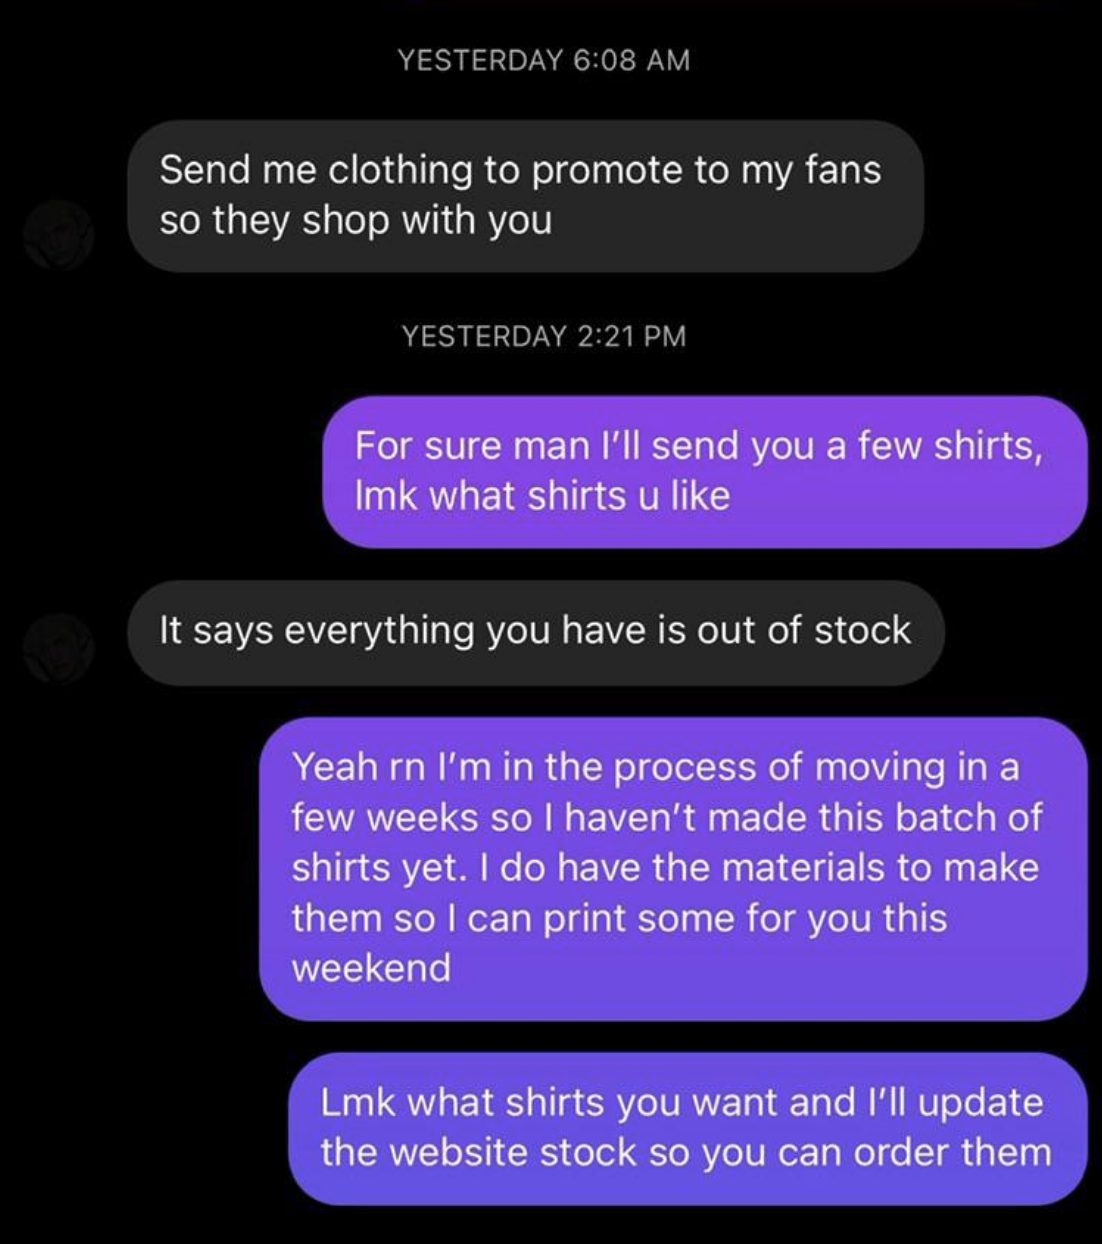 &quot;Lmk what shirts you want&quot;